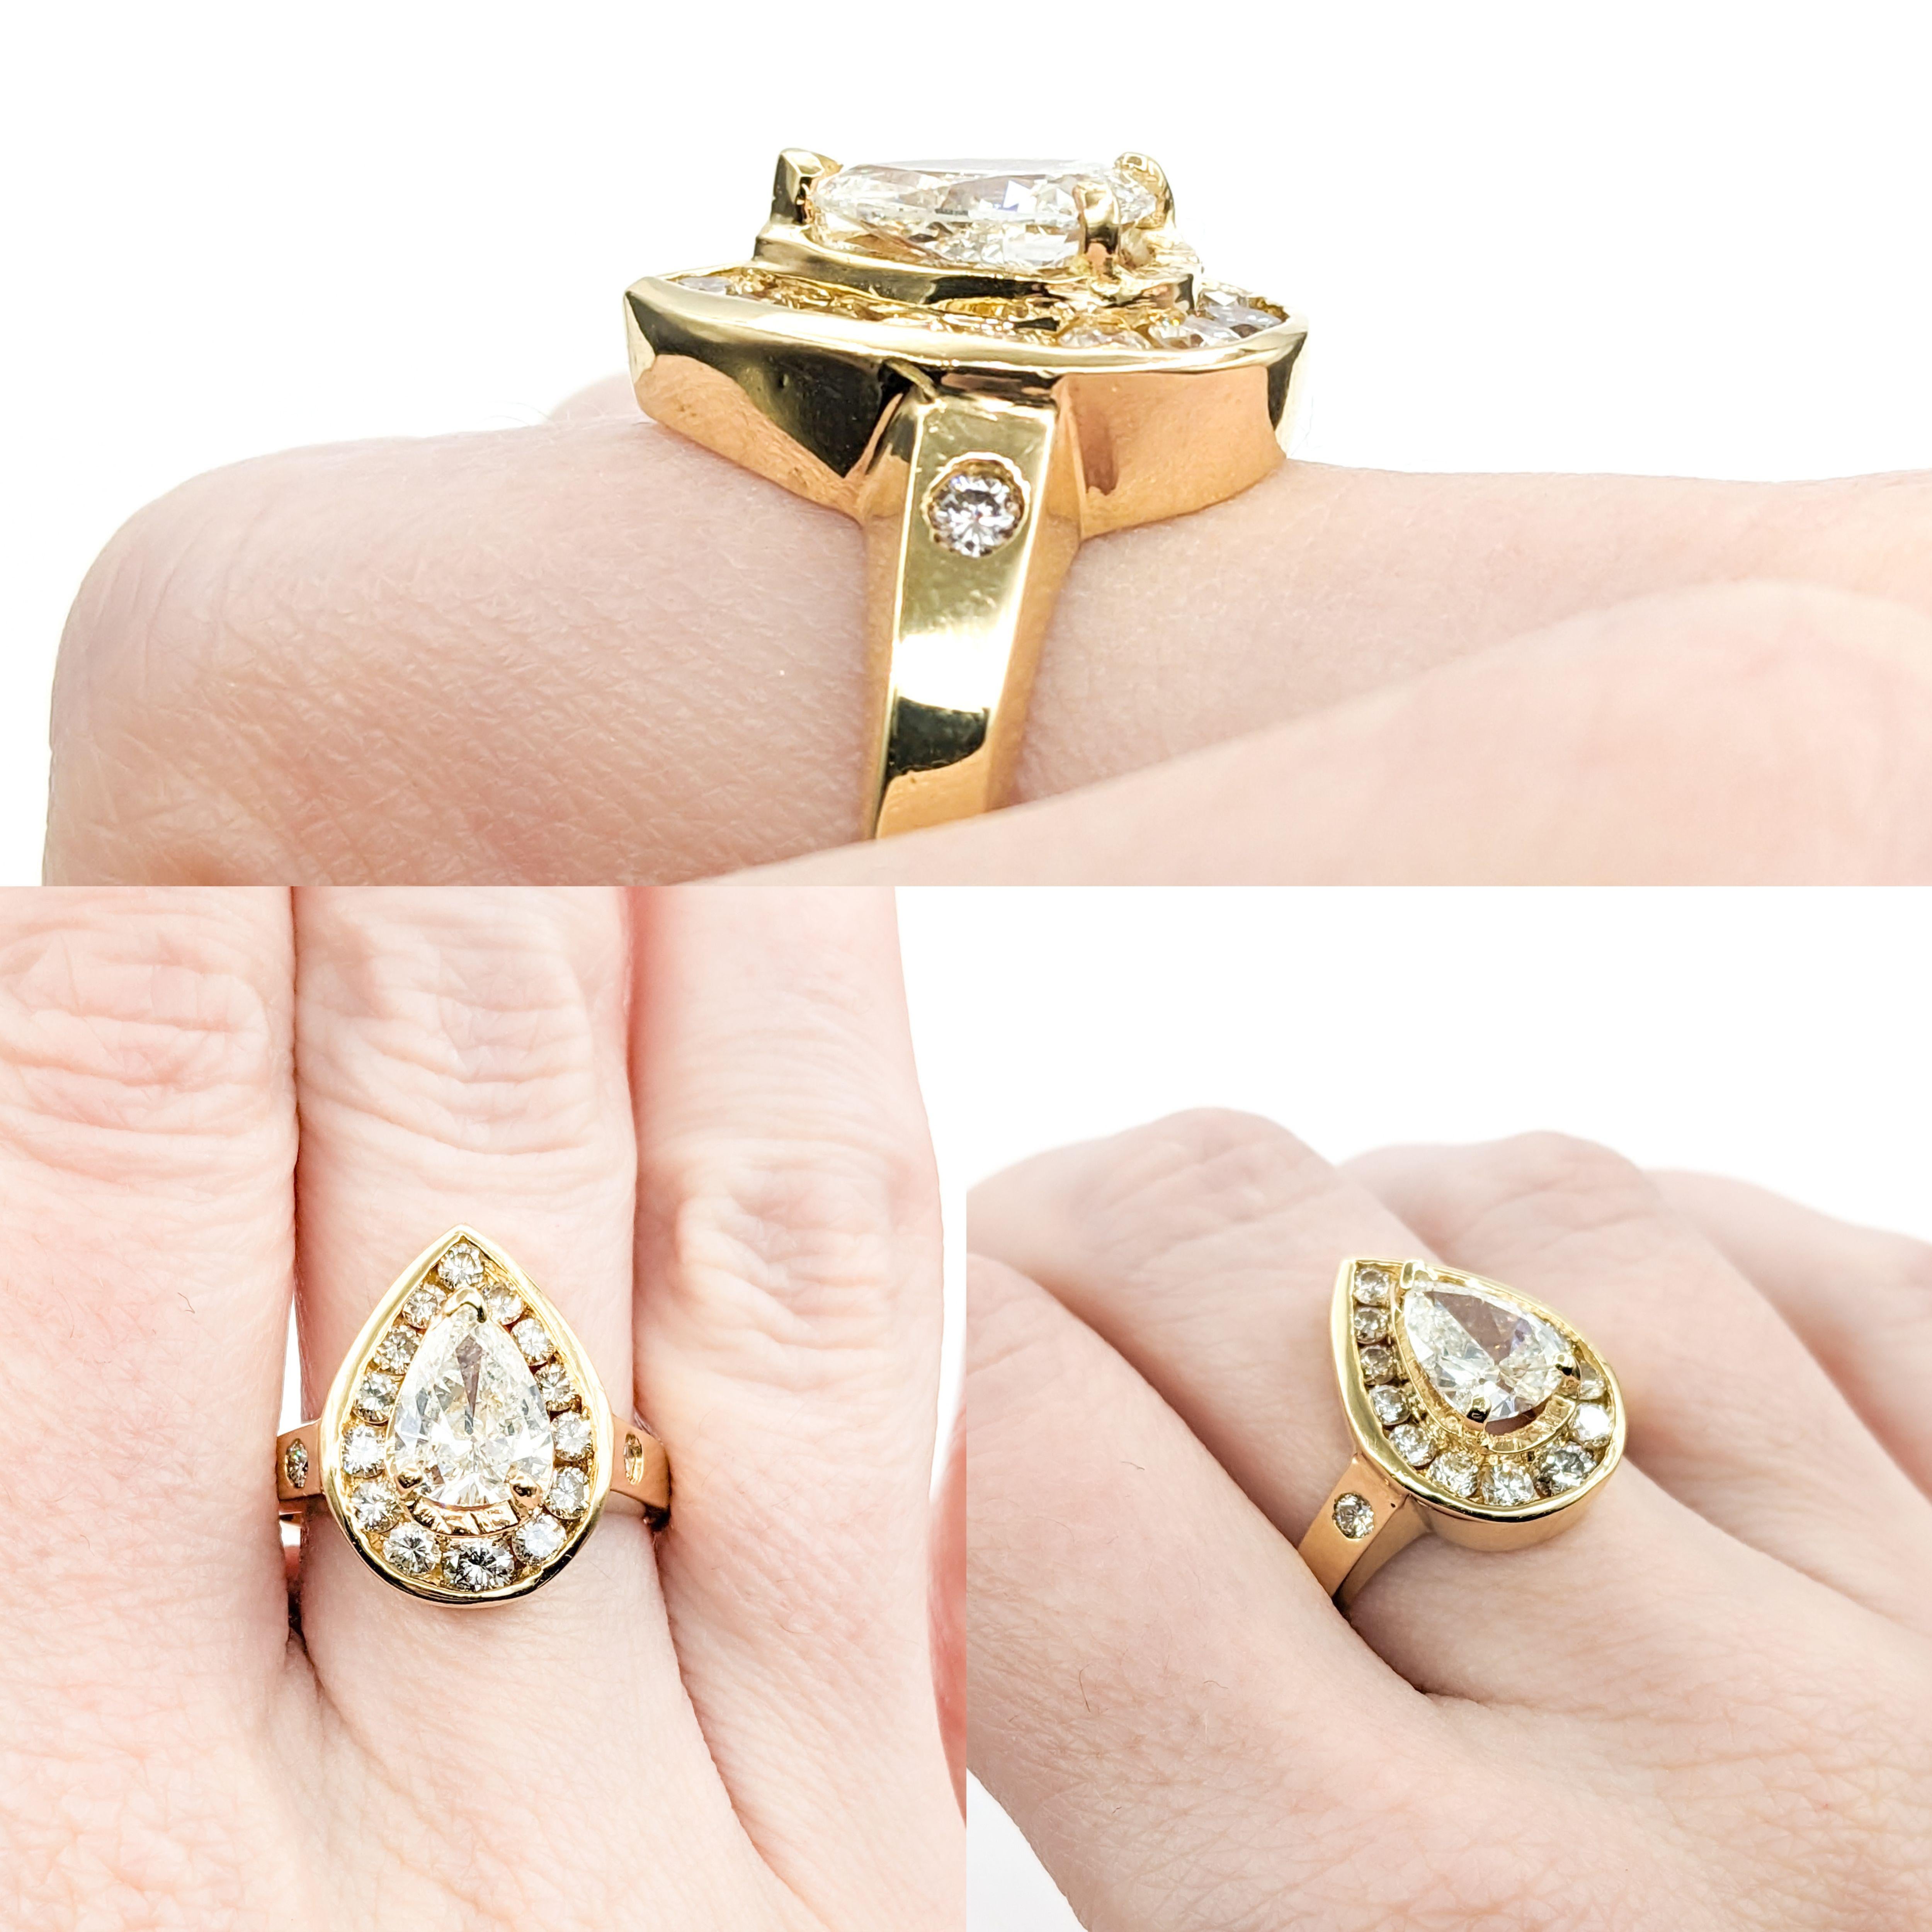 Significant 18k 1.60ct Pear Cut Halo Diamond Ring

Indulge in the exquisite beauty of our meticulously crafted 18k yellow gold ring. This stunning piece showcases a magnificent 1.60ct pear cut diamond at its center, radiating brilliance and